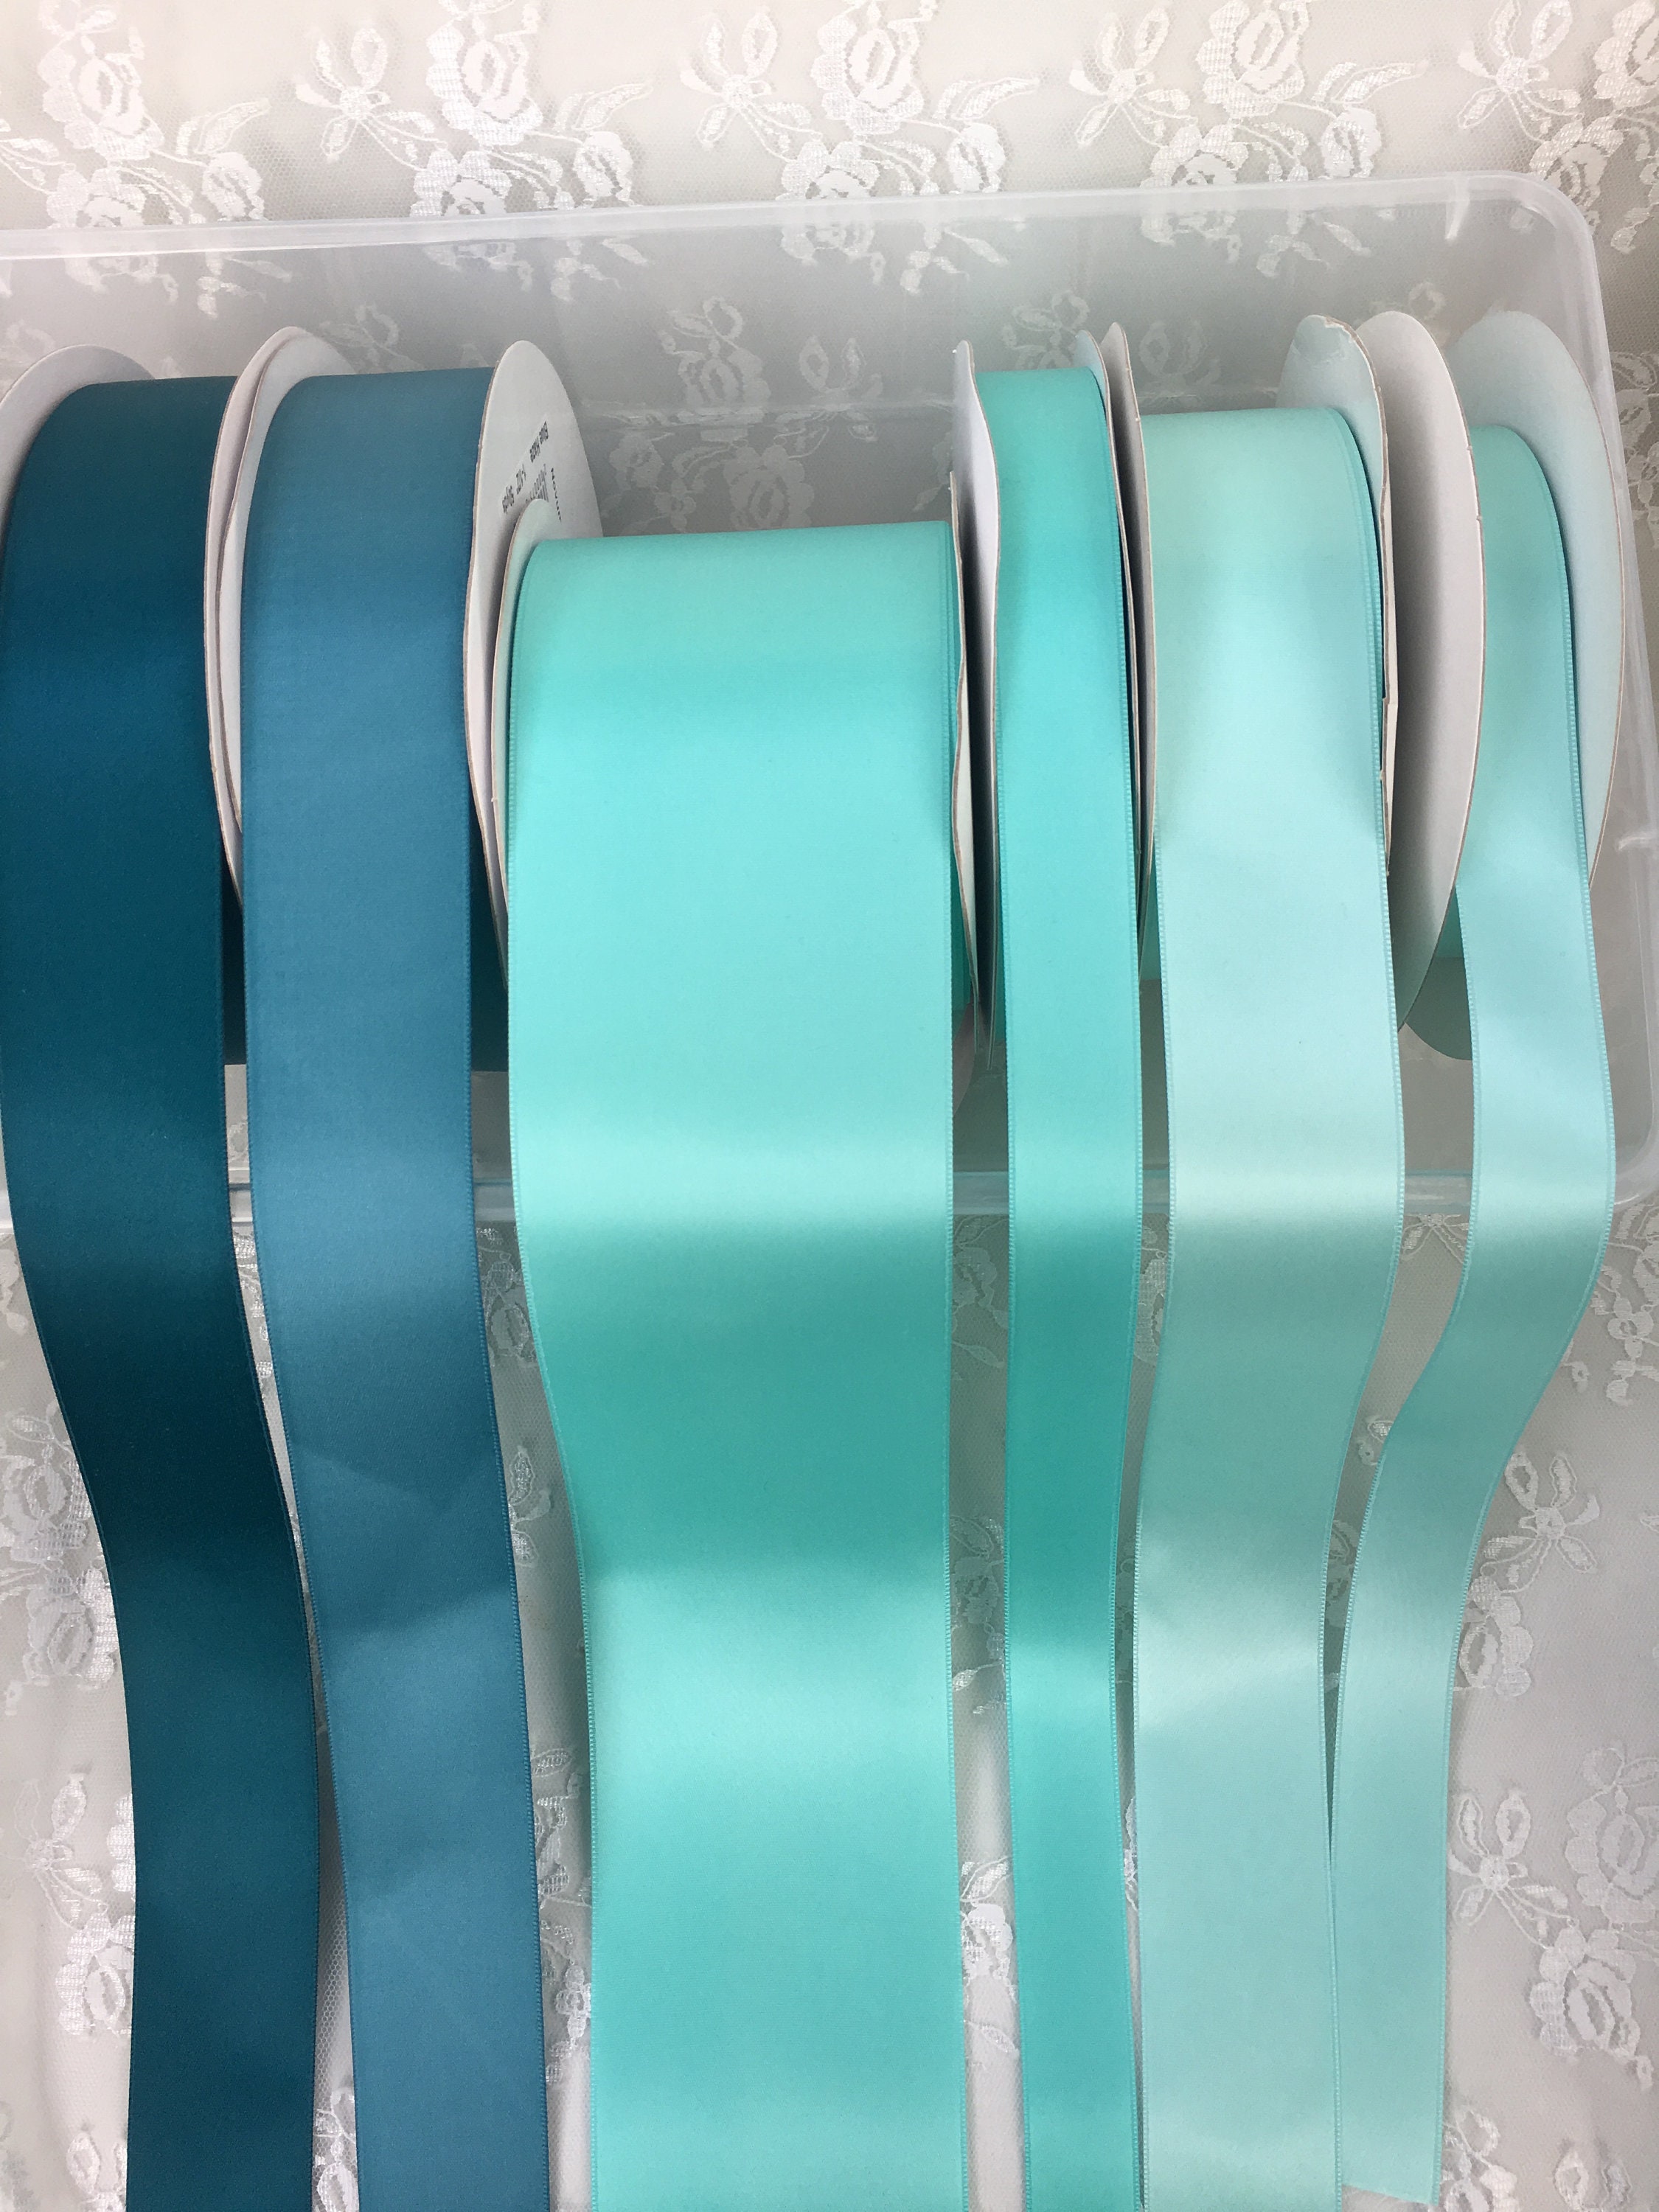 Turquoise Blue Ribbon 1 inch x 25 Yards, Satin Fabric Silk Ribbon for Gift Wrapping, Hair Bows Making, Floral Bouquets, Wreaths, DIY Sewing Projects